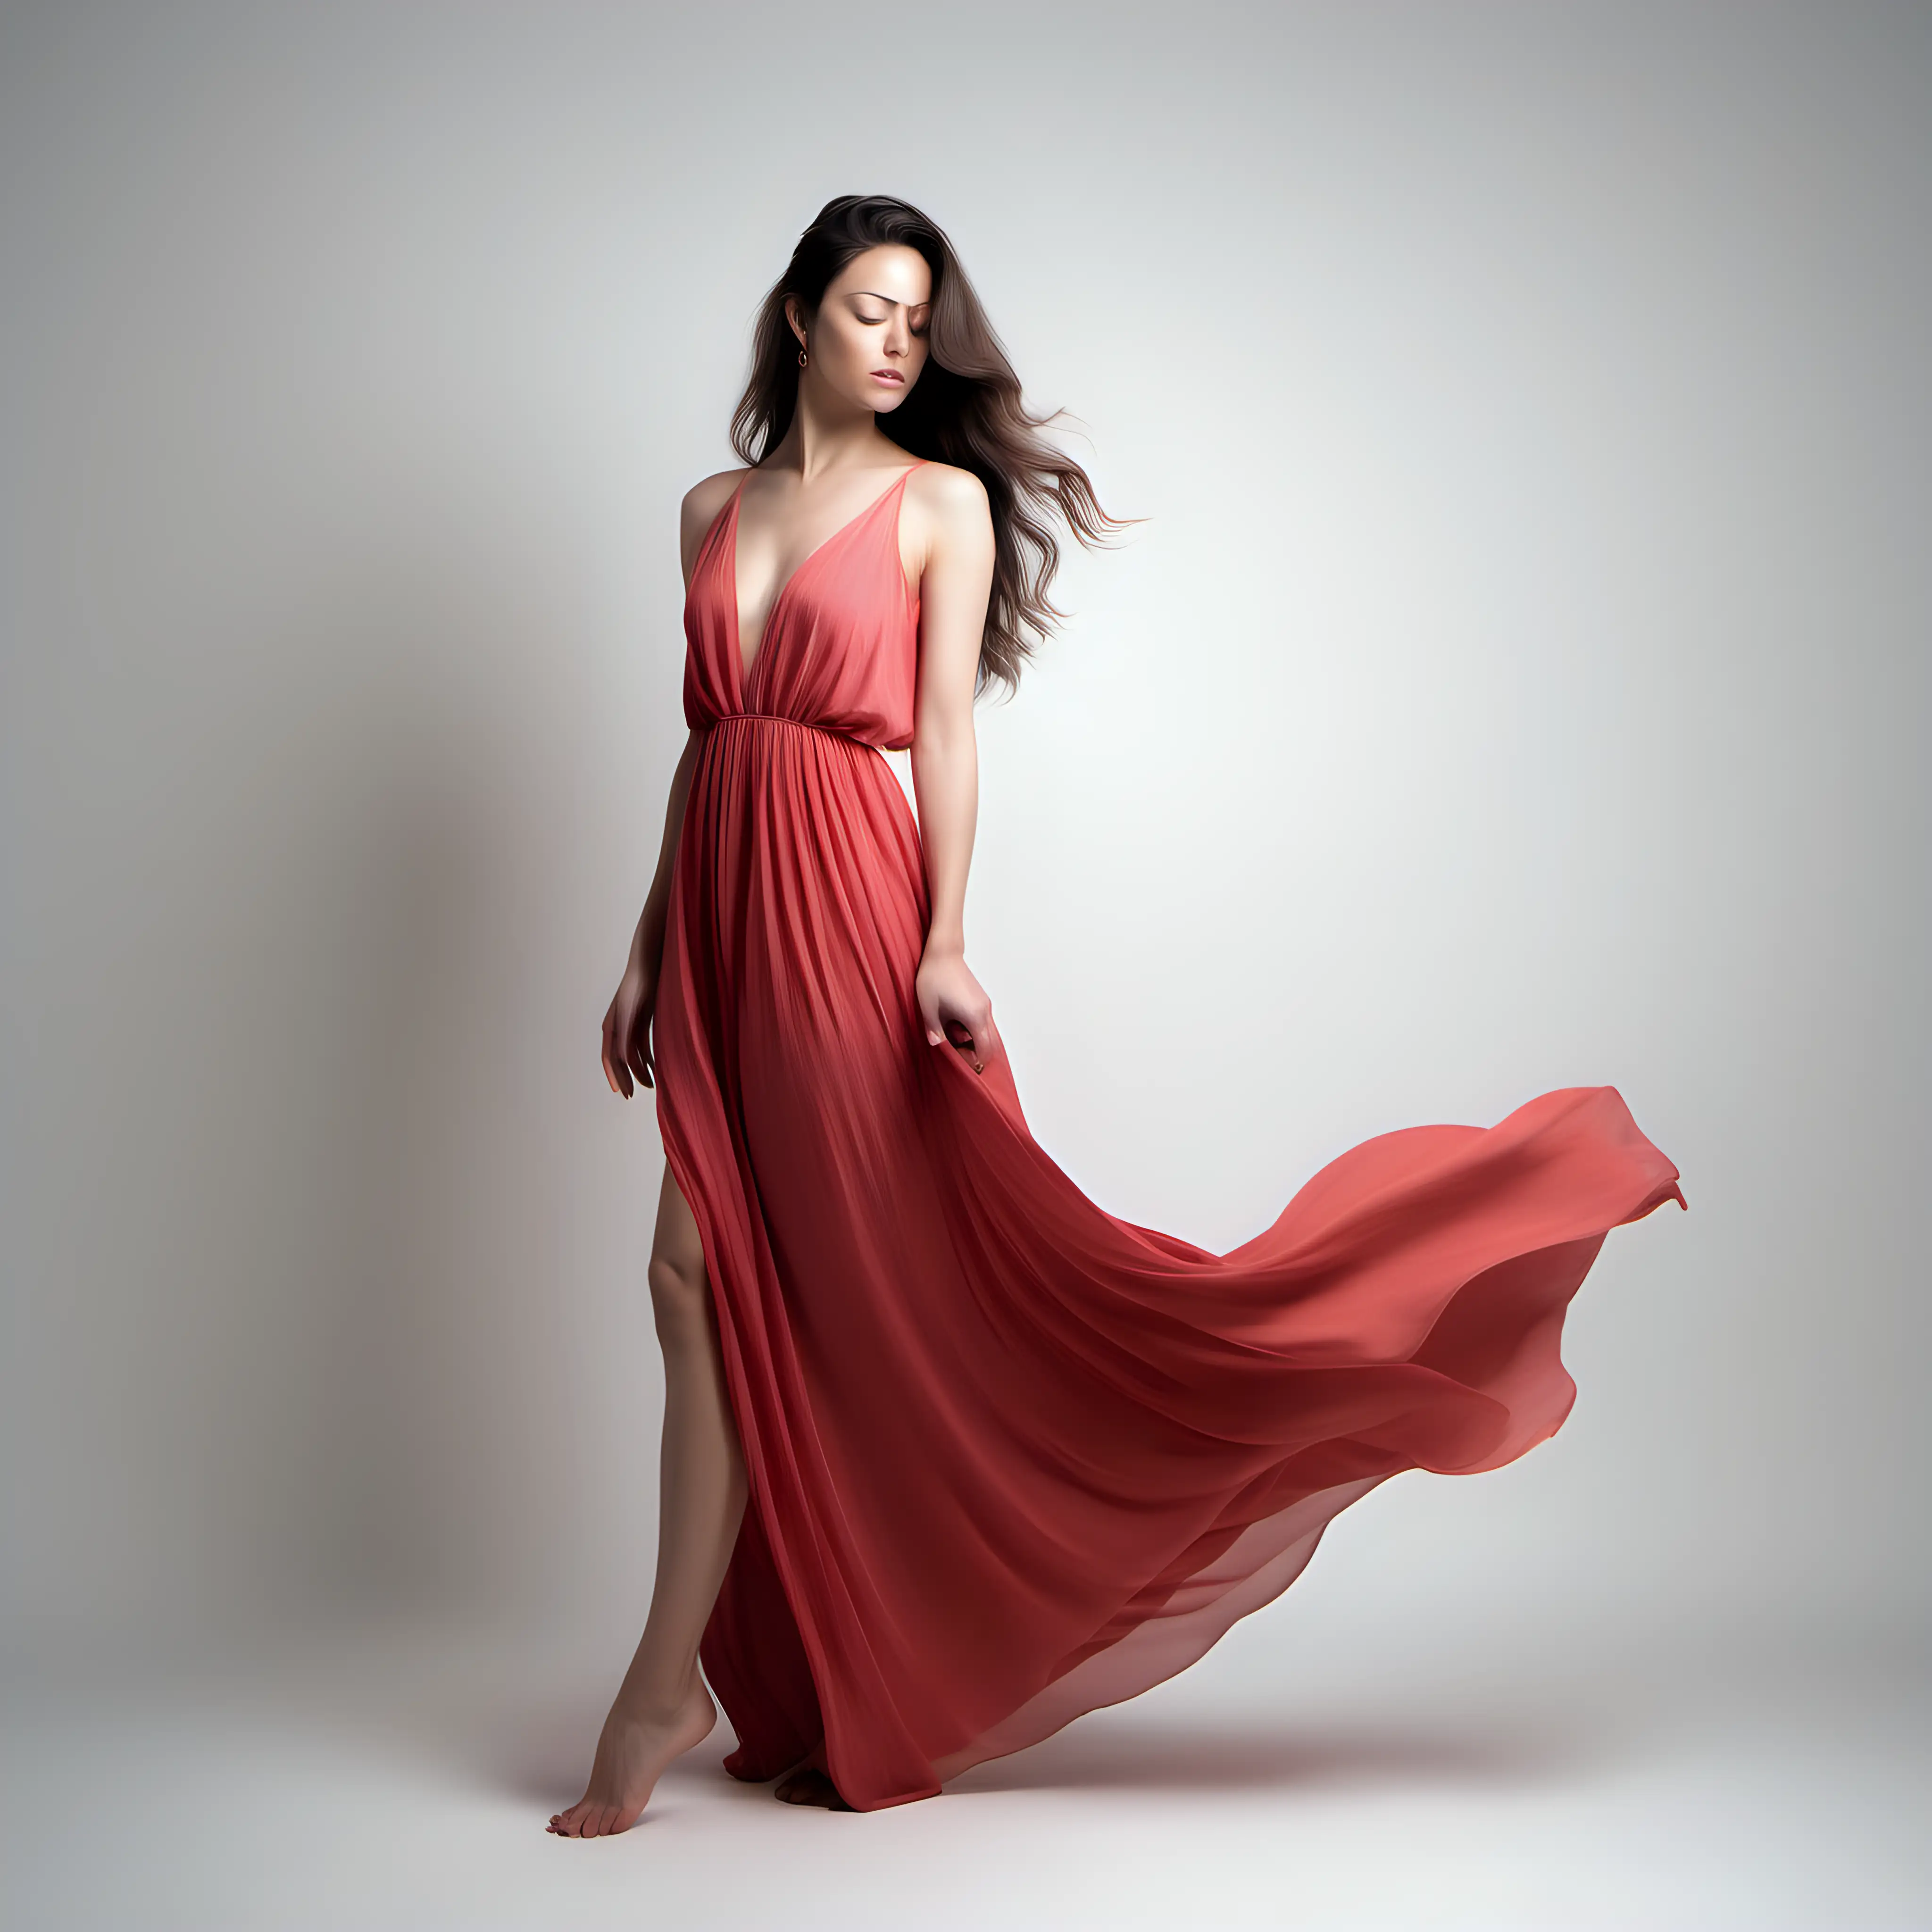 full body pose of a model type woman with even lighting, in long flowing pastel red dress looking down with a  White Background